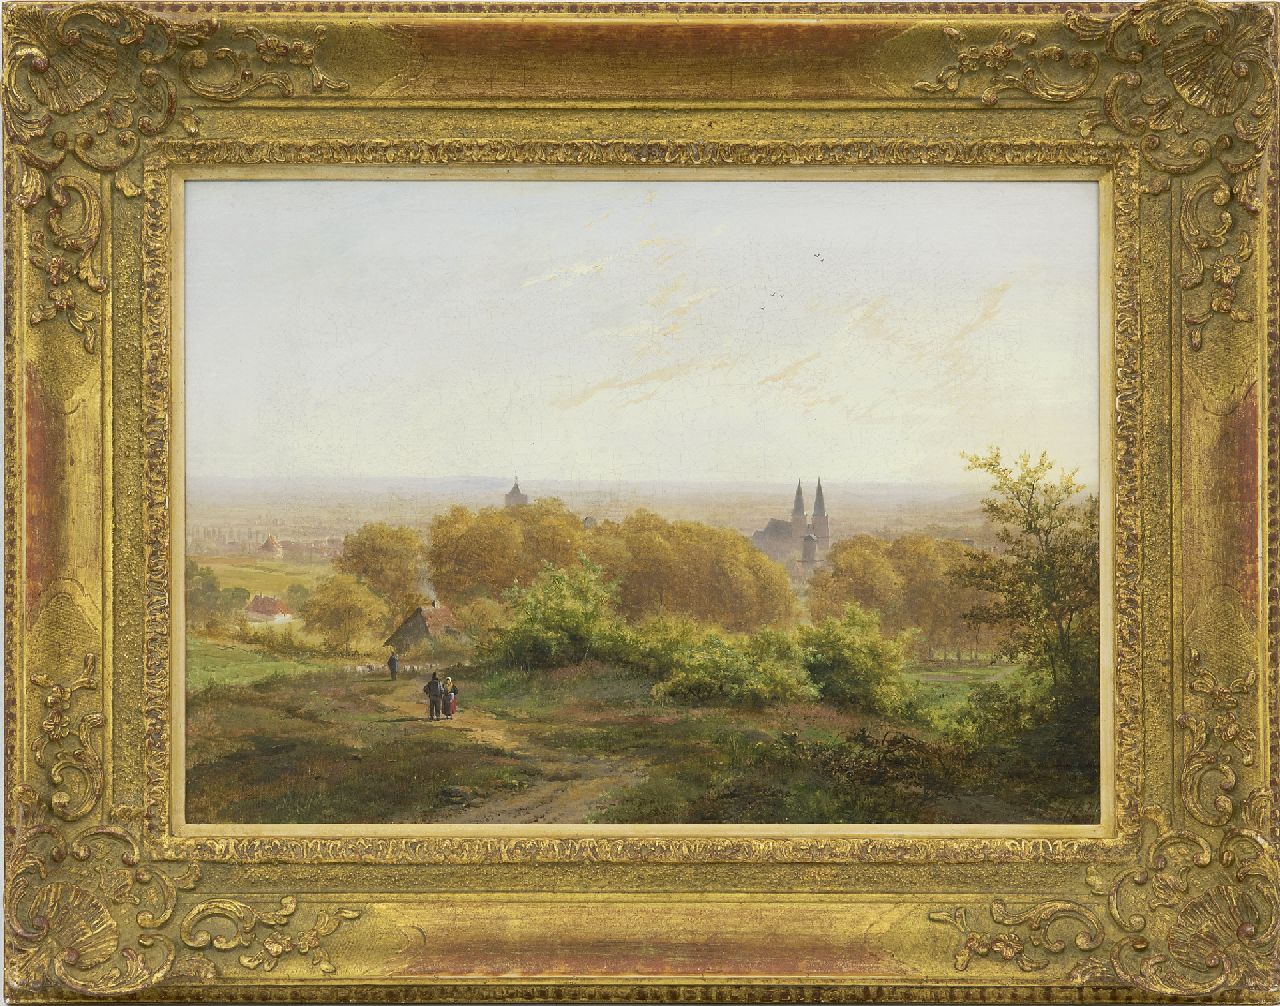 Klombeck J.B.  | Johann Bernard Klombeck | Paintings offered for sale | A panoramic view on Cleve, Germany, oil on canvas laid down on panel 32.2 x 44.7 cm, signed l.r. with initials and dated 1844